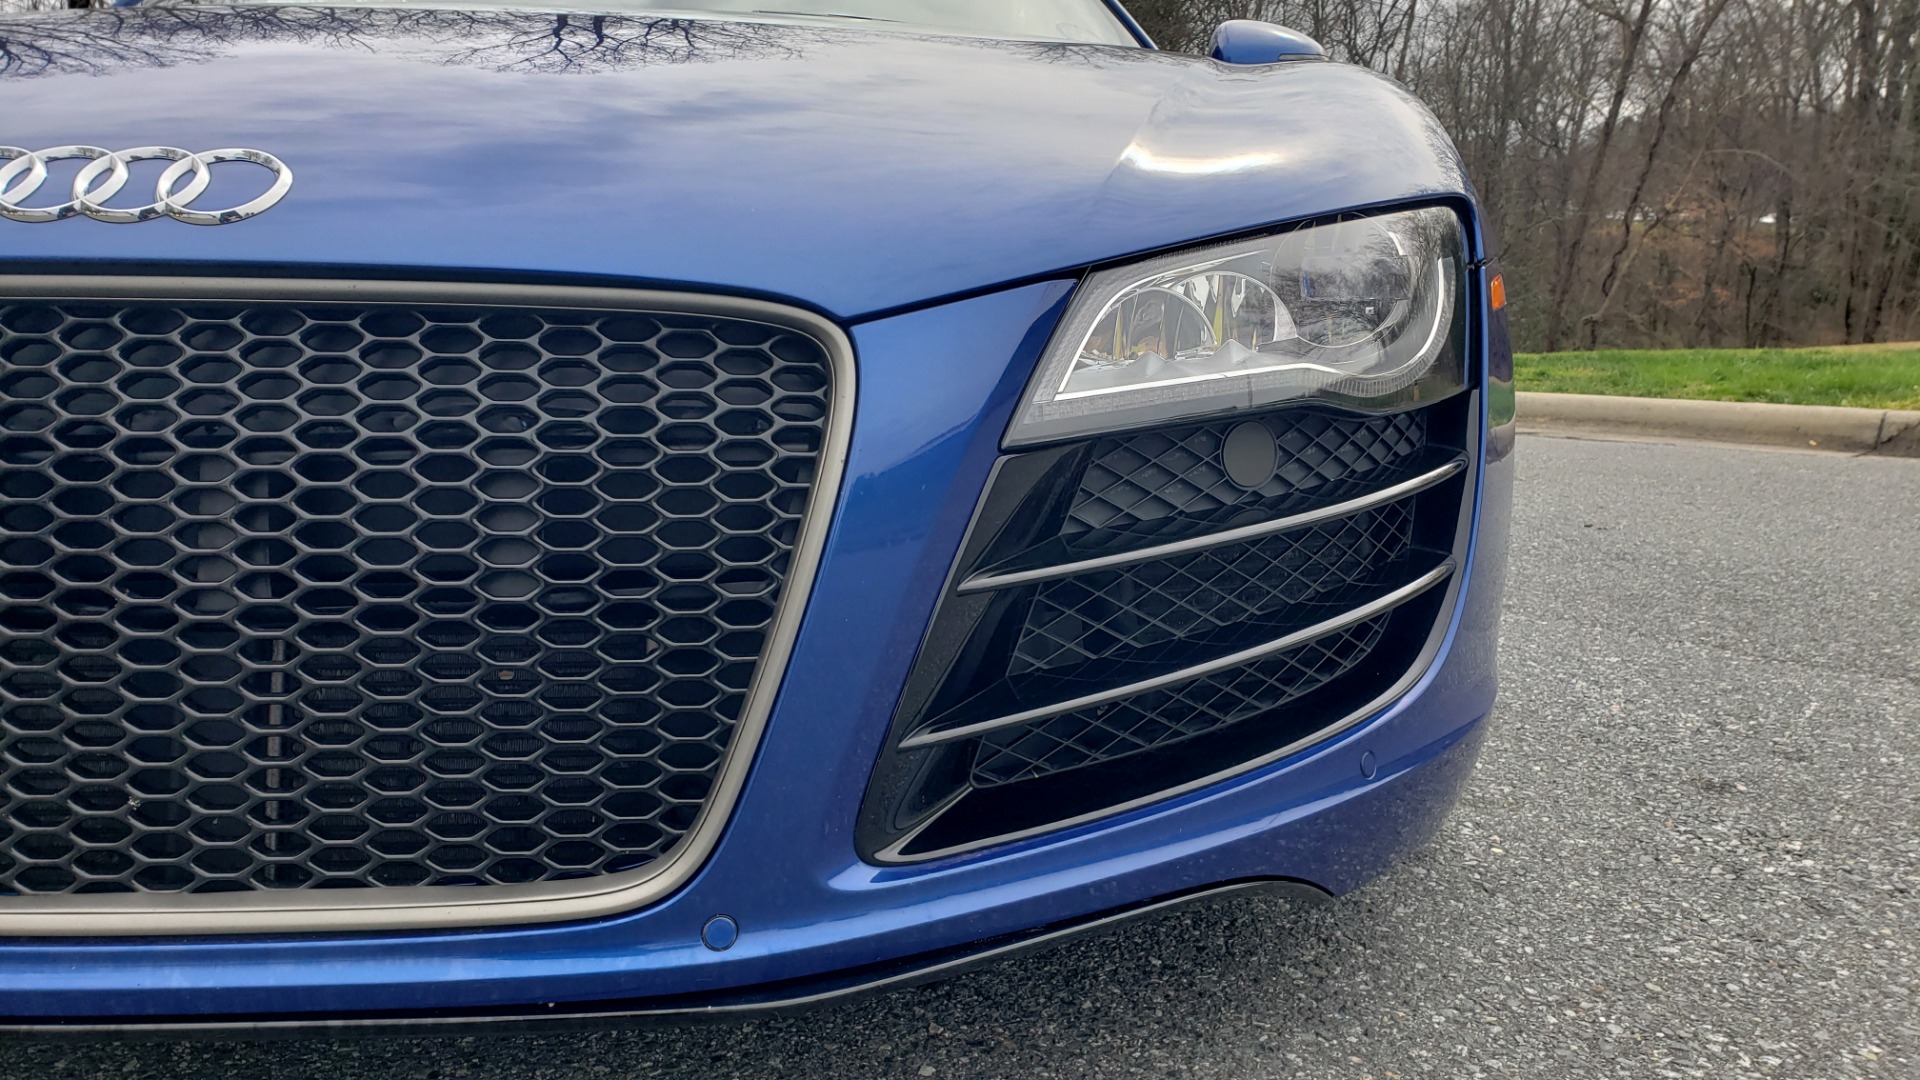 Used 2010 Audi R8 5.2L V10 / AWD / COUPE / NAV / 6-SPD AUTO / CUSTOM WHEELS for sale Sold at Formula Imports in Charlotte NC 28227 26